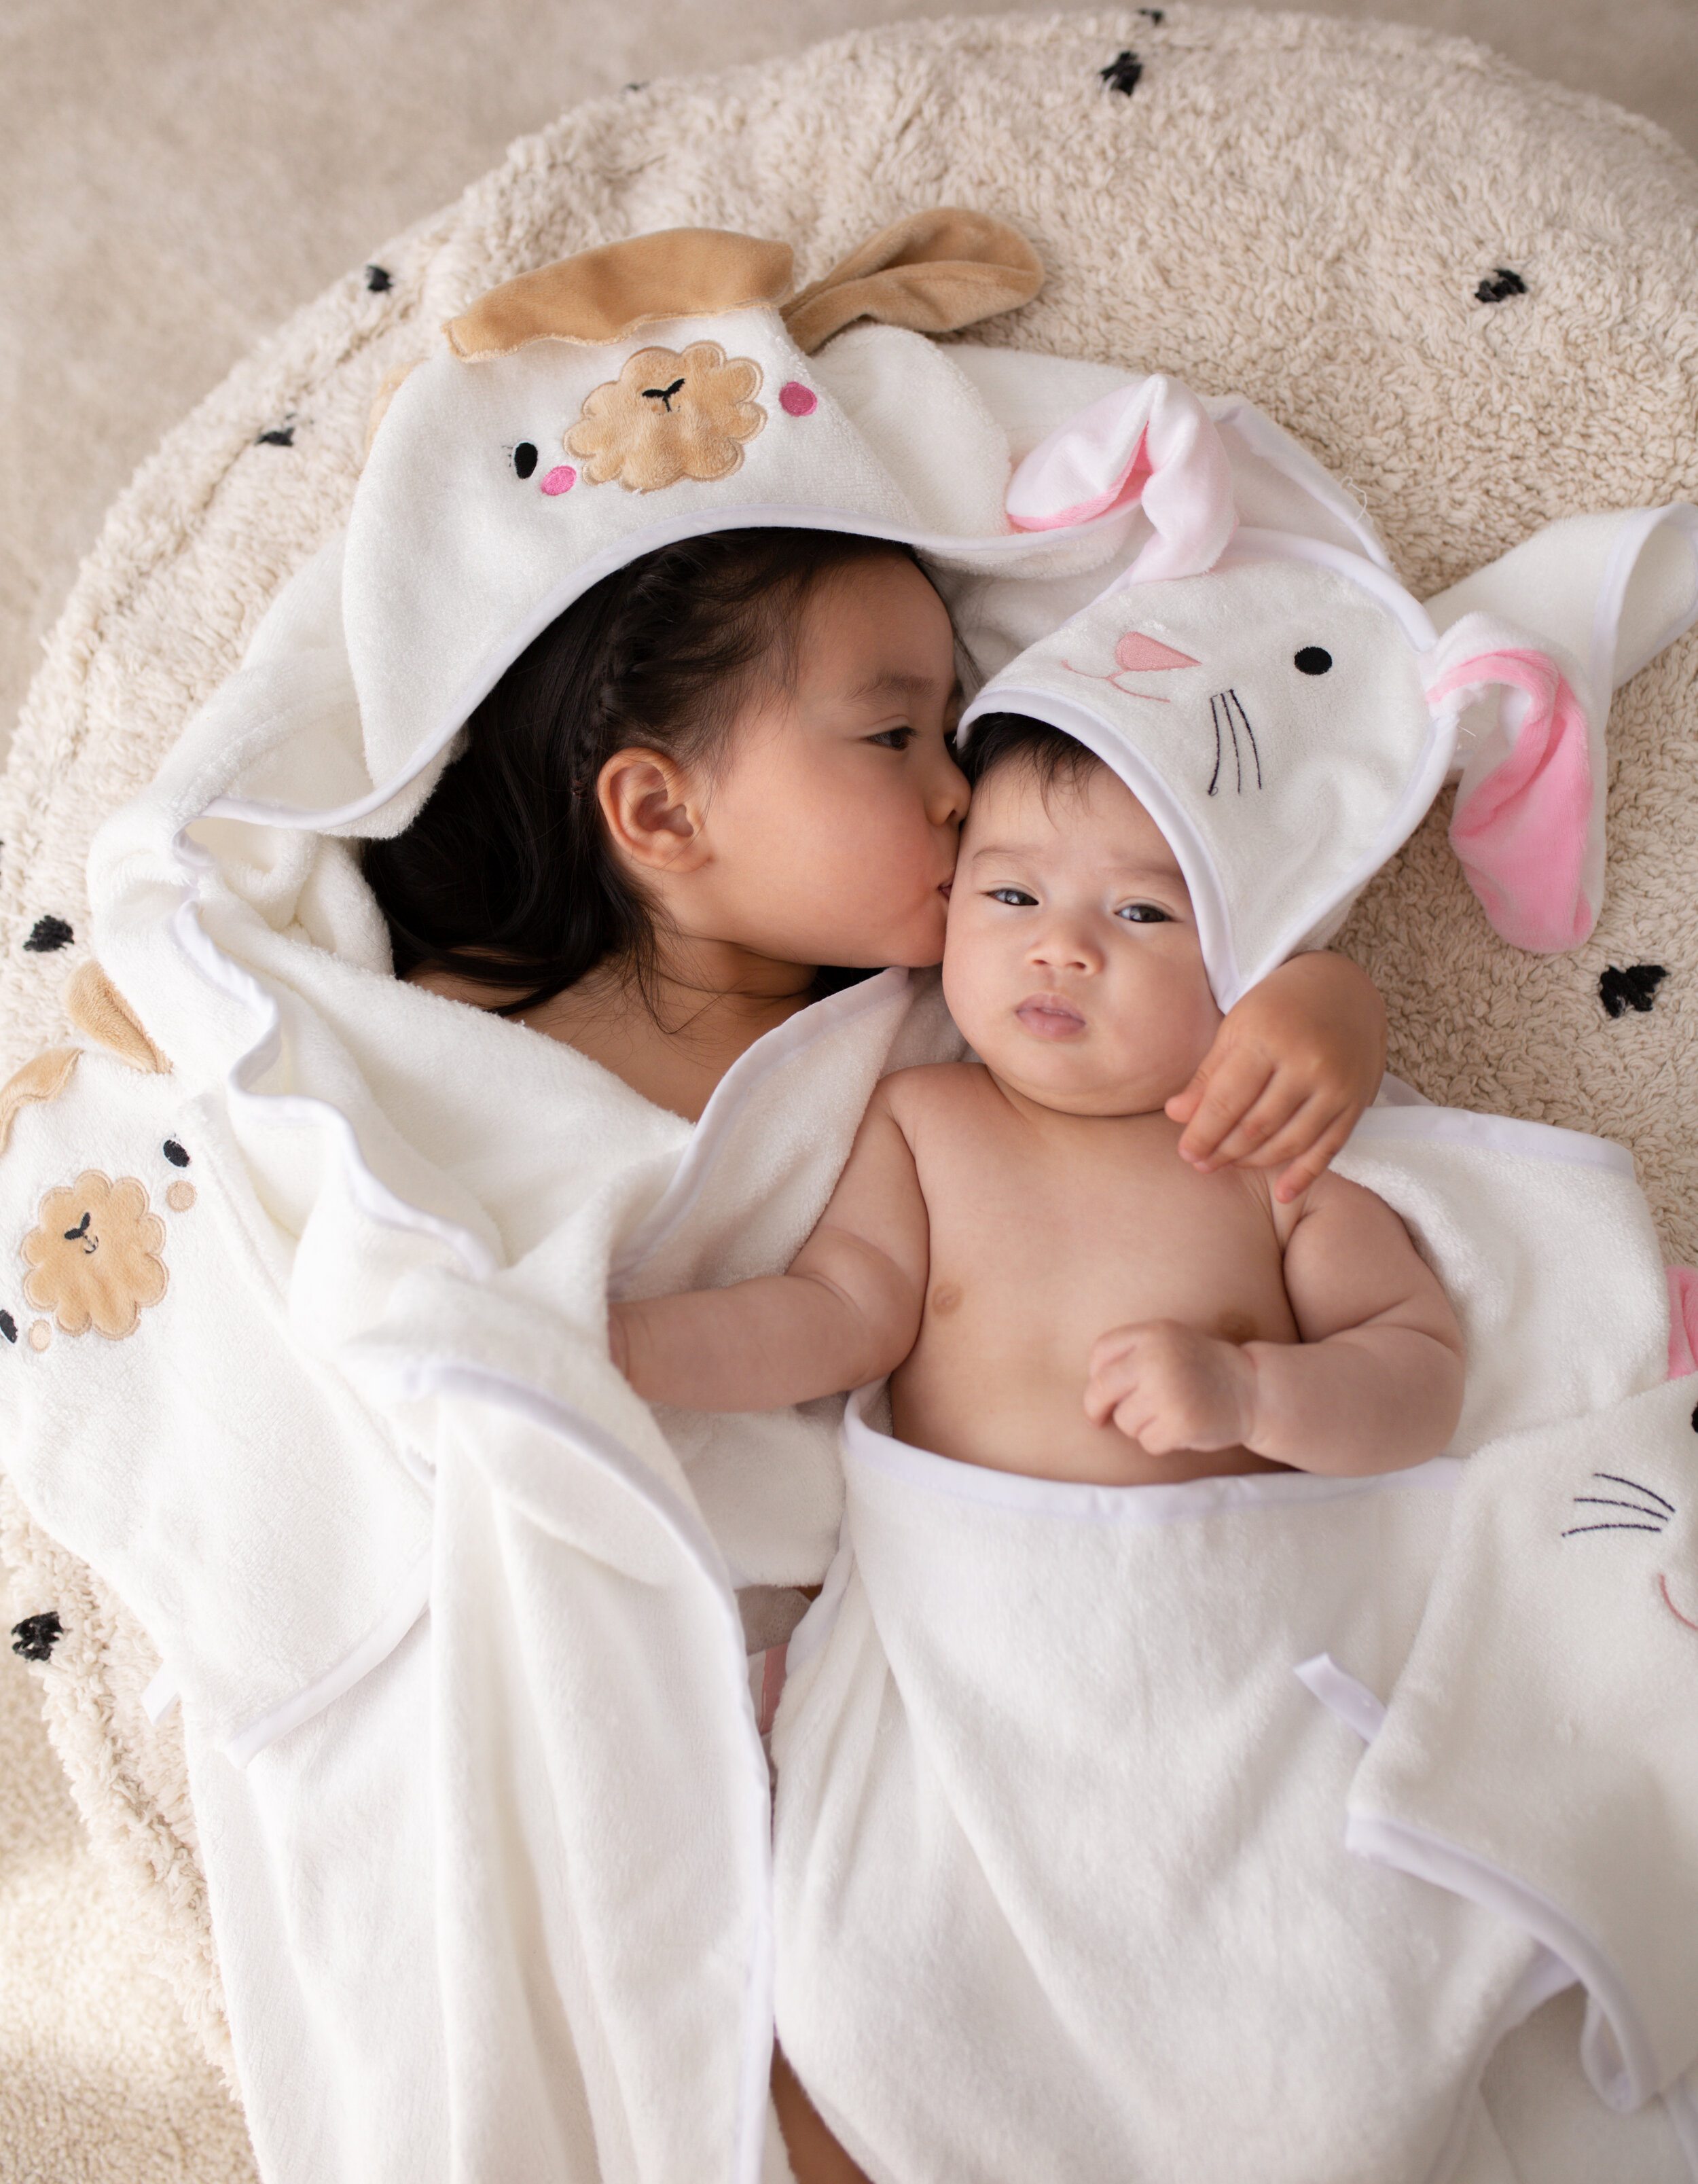 Two young children in hooded baby towels